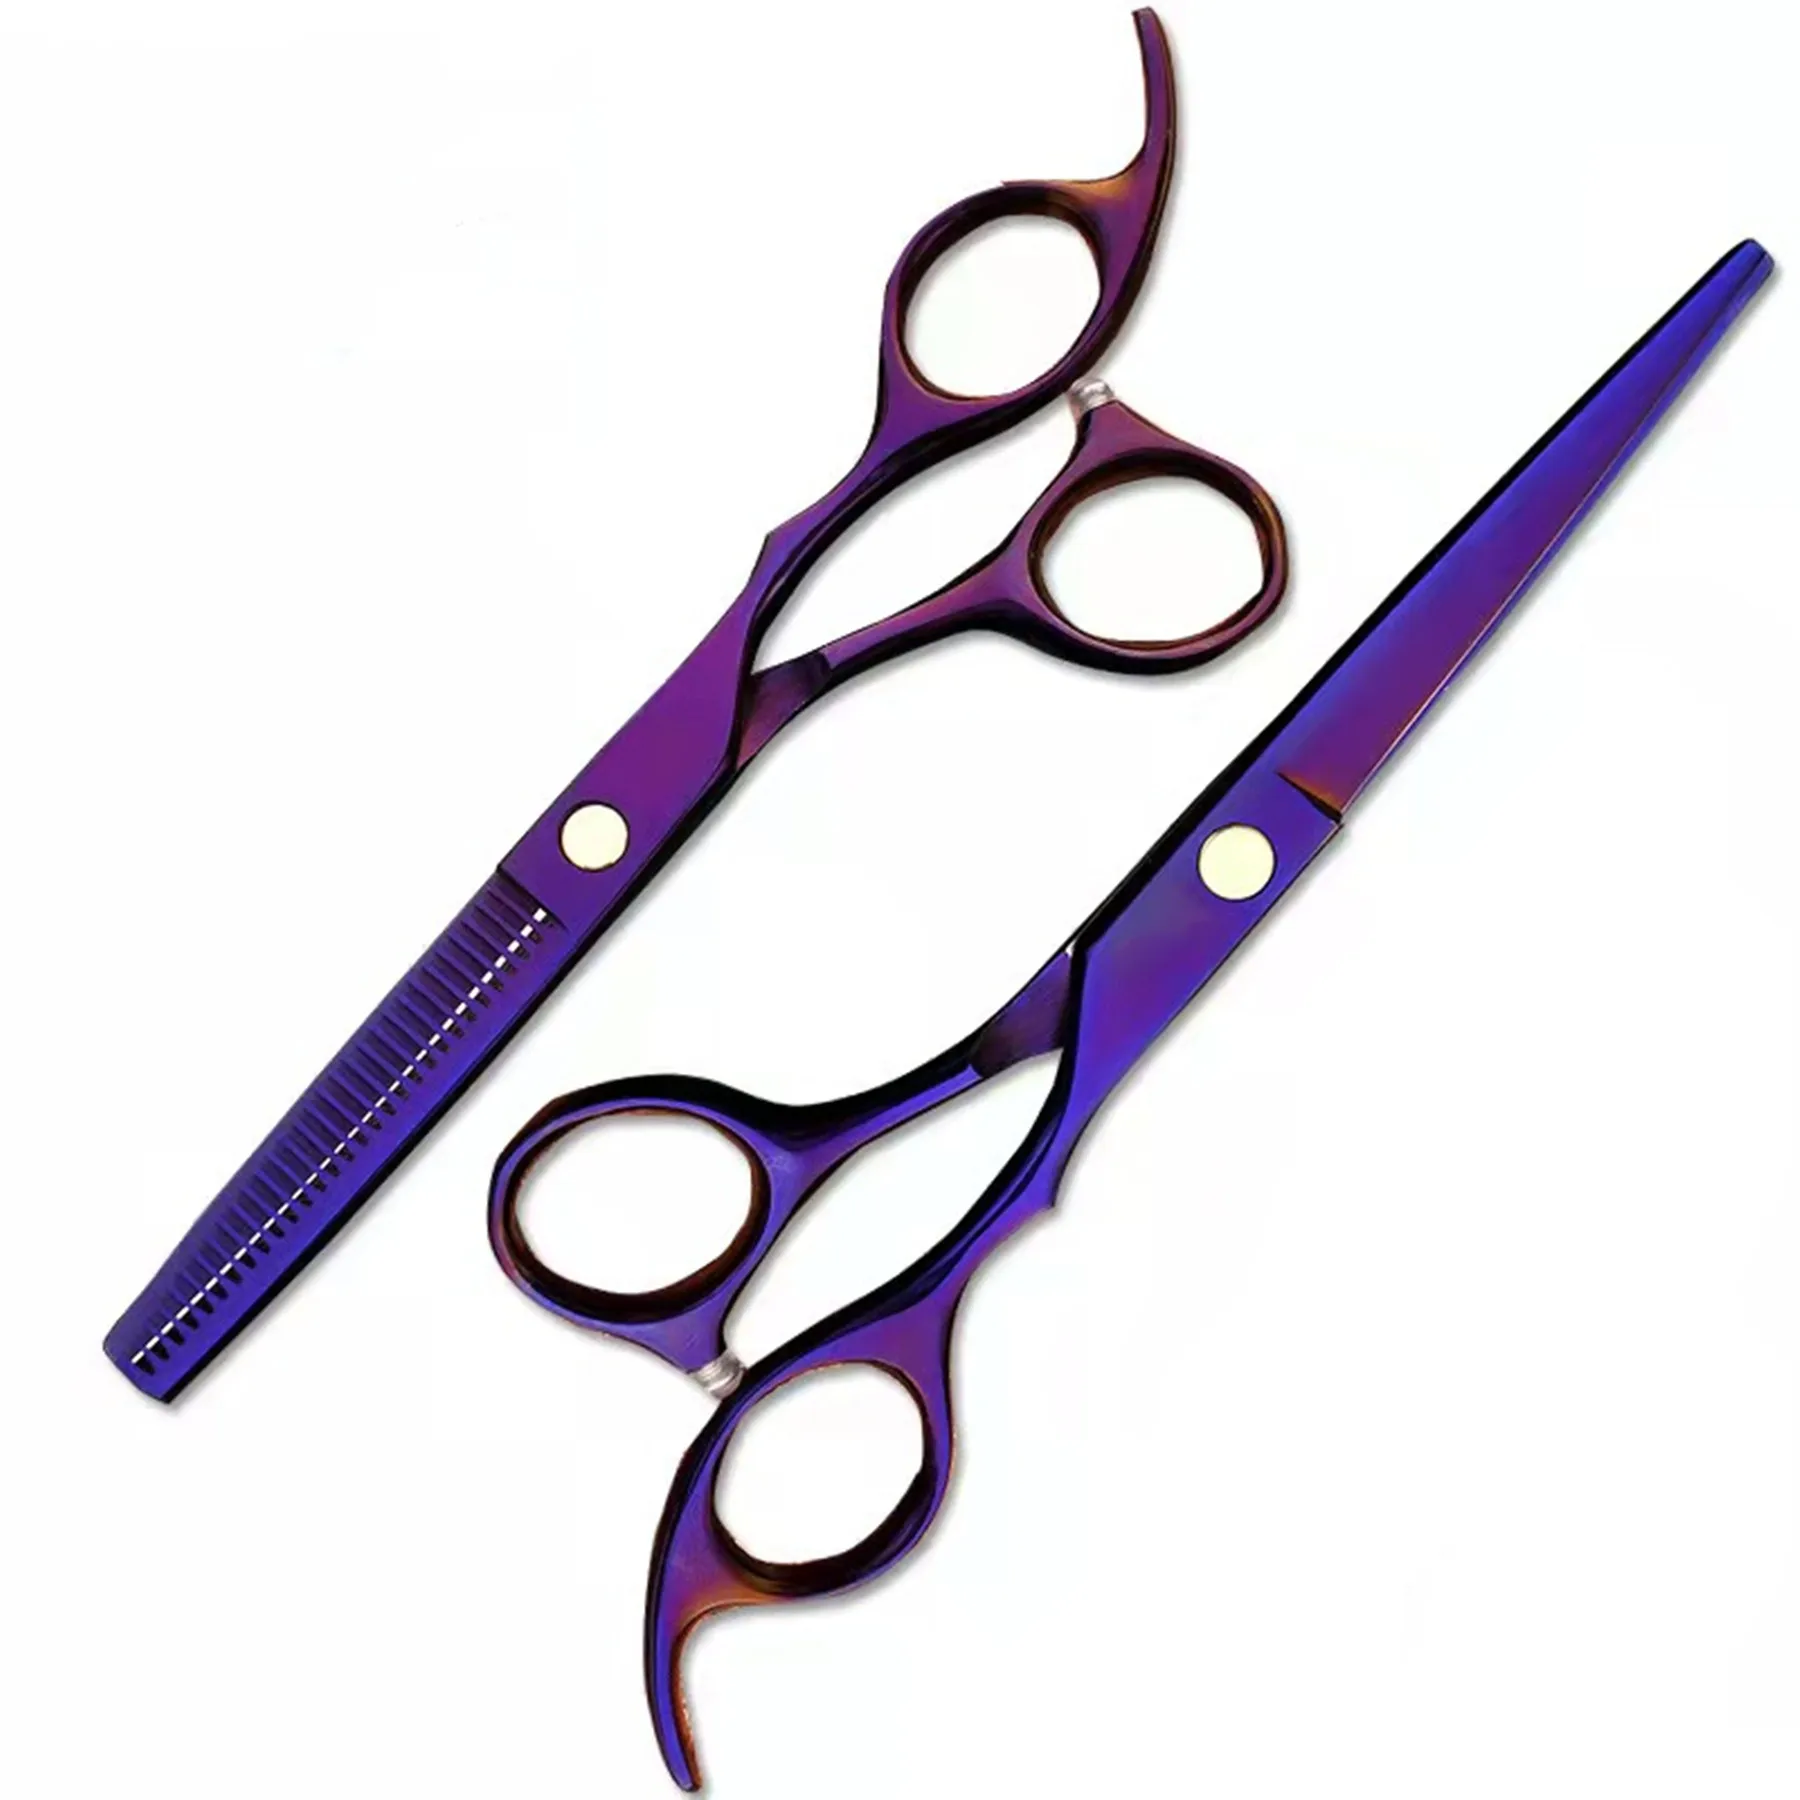 

Professional 440C 6.0 Inch Salon Hairdressing Scissors Shears Barber Cutting & Thinning Hair Scissors For Salon And Home Use